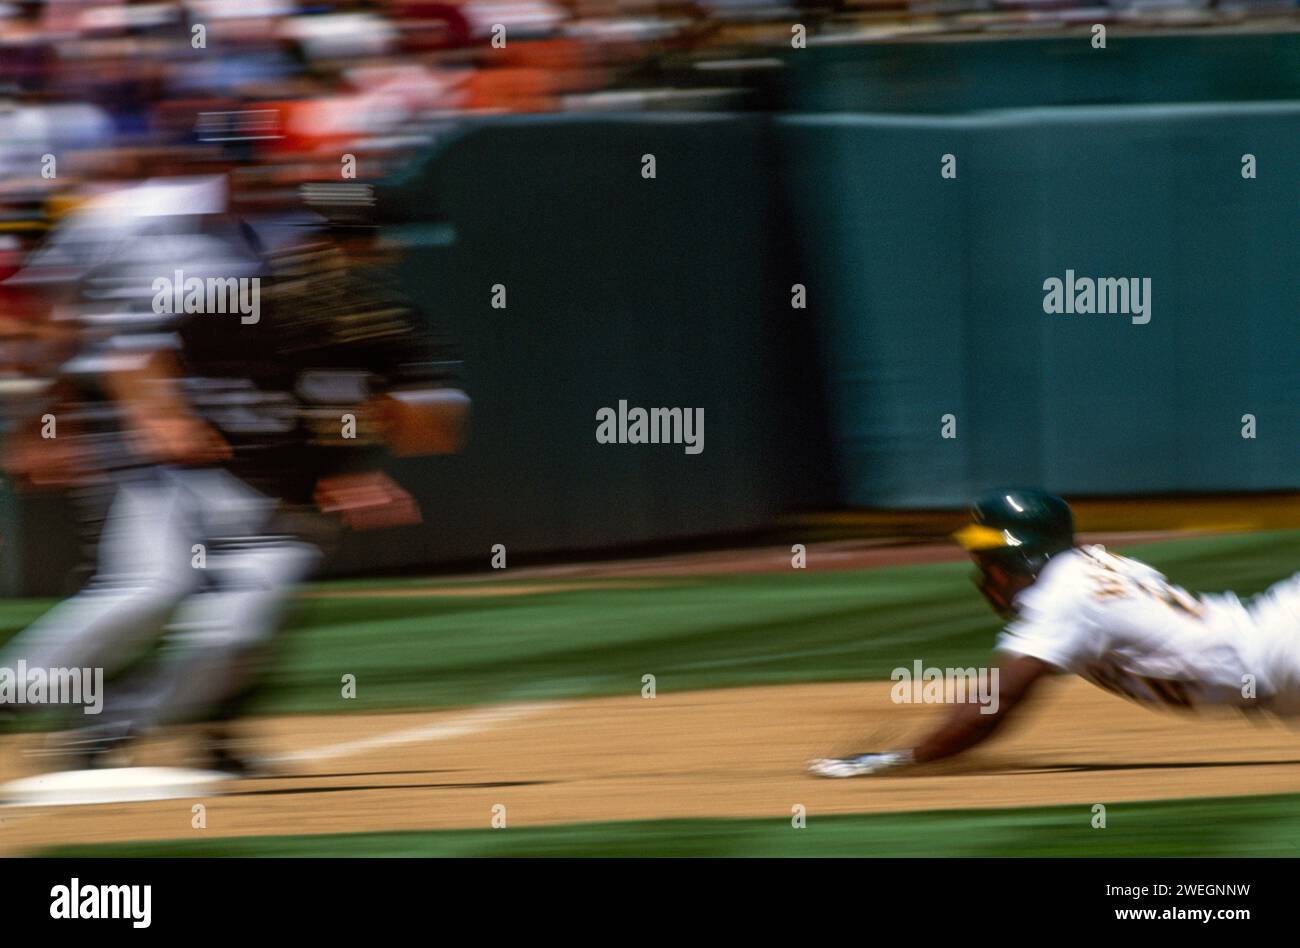 Ricky Henderson steals third base for the A's at the Oakland Coliseum, Oakland, California Stock Photo